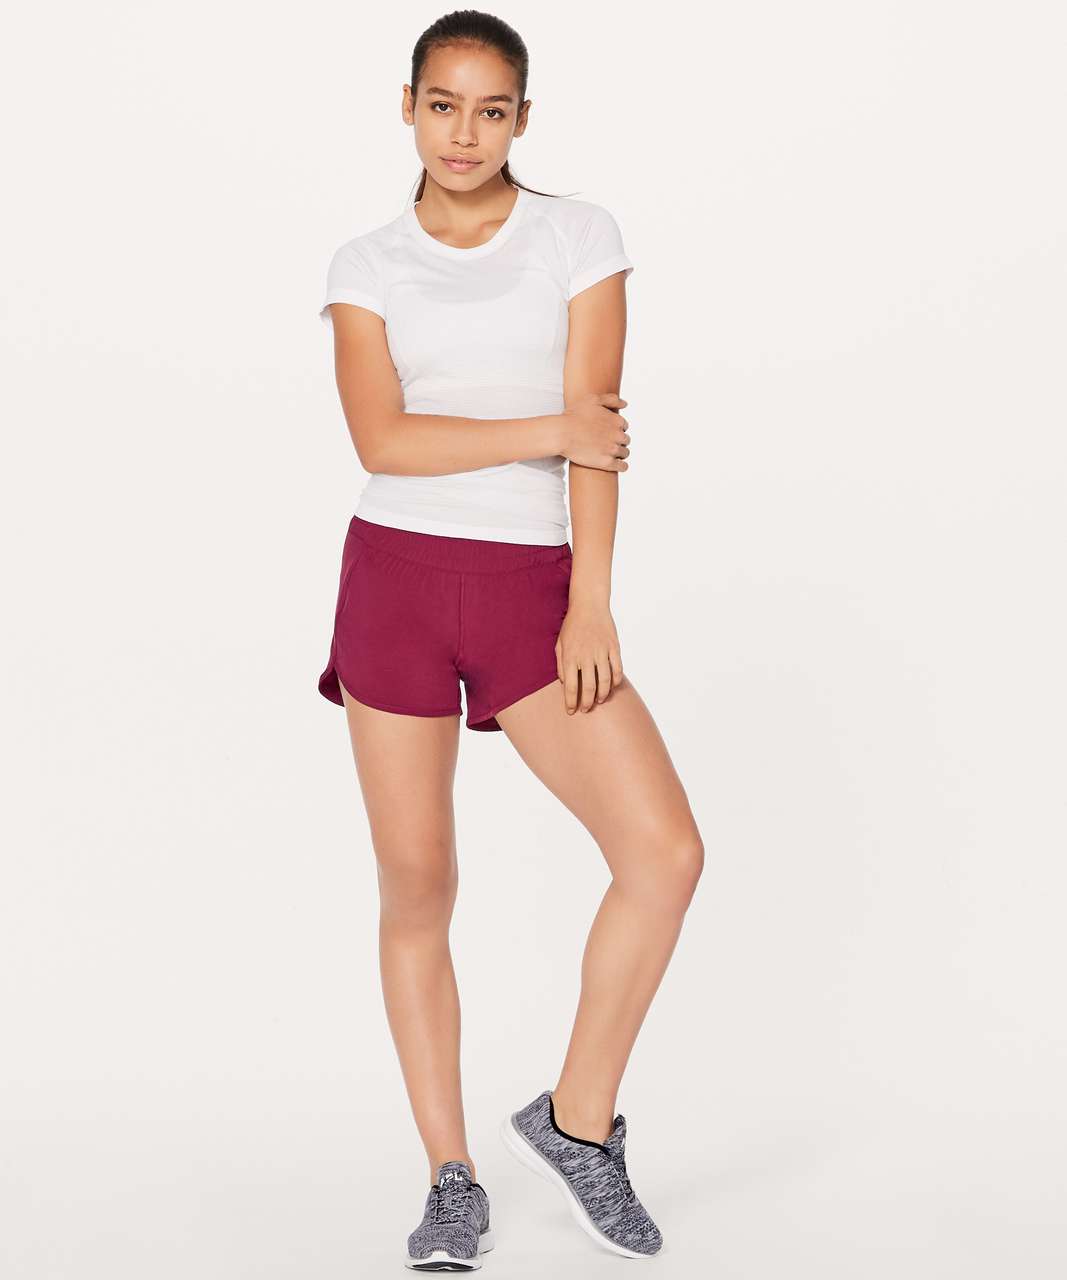 How to Find Lululemon Shorts on DHGate - Playbite